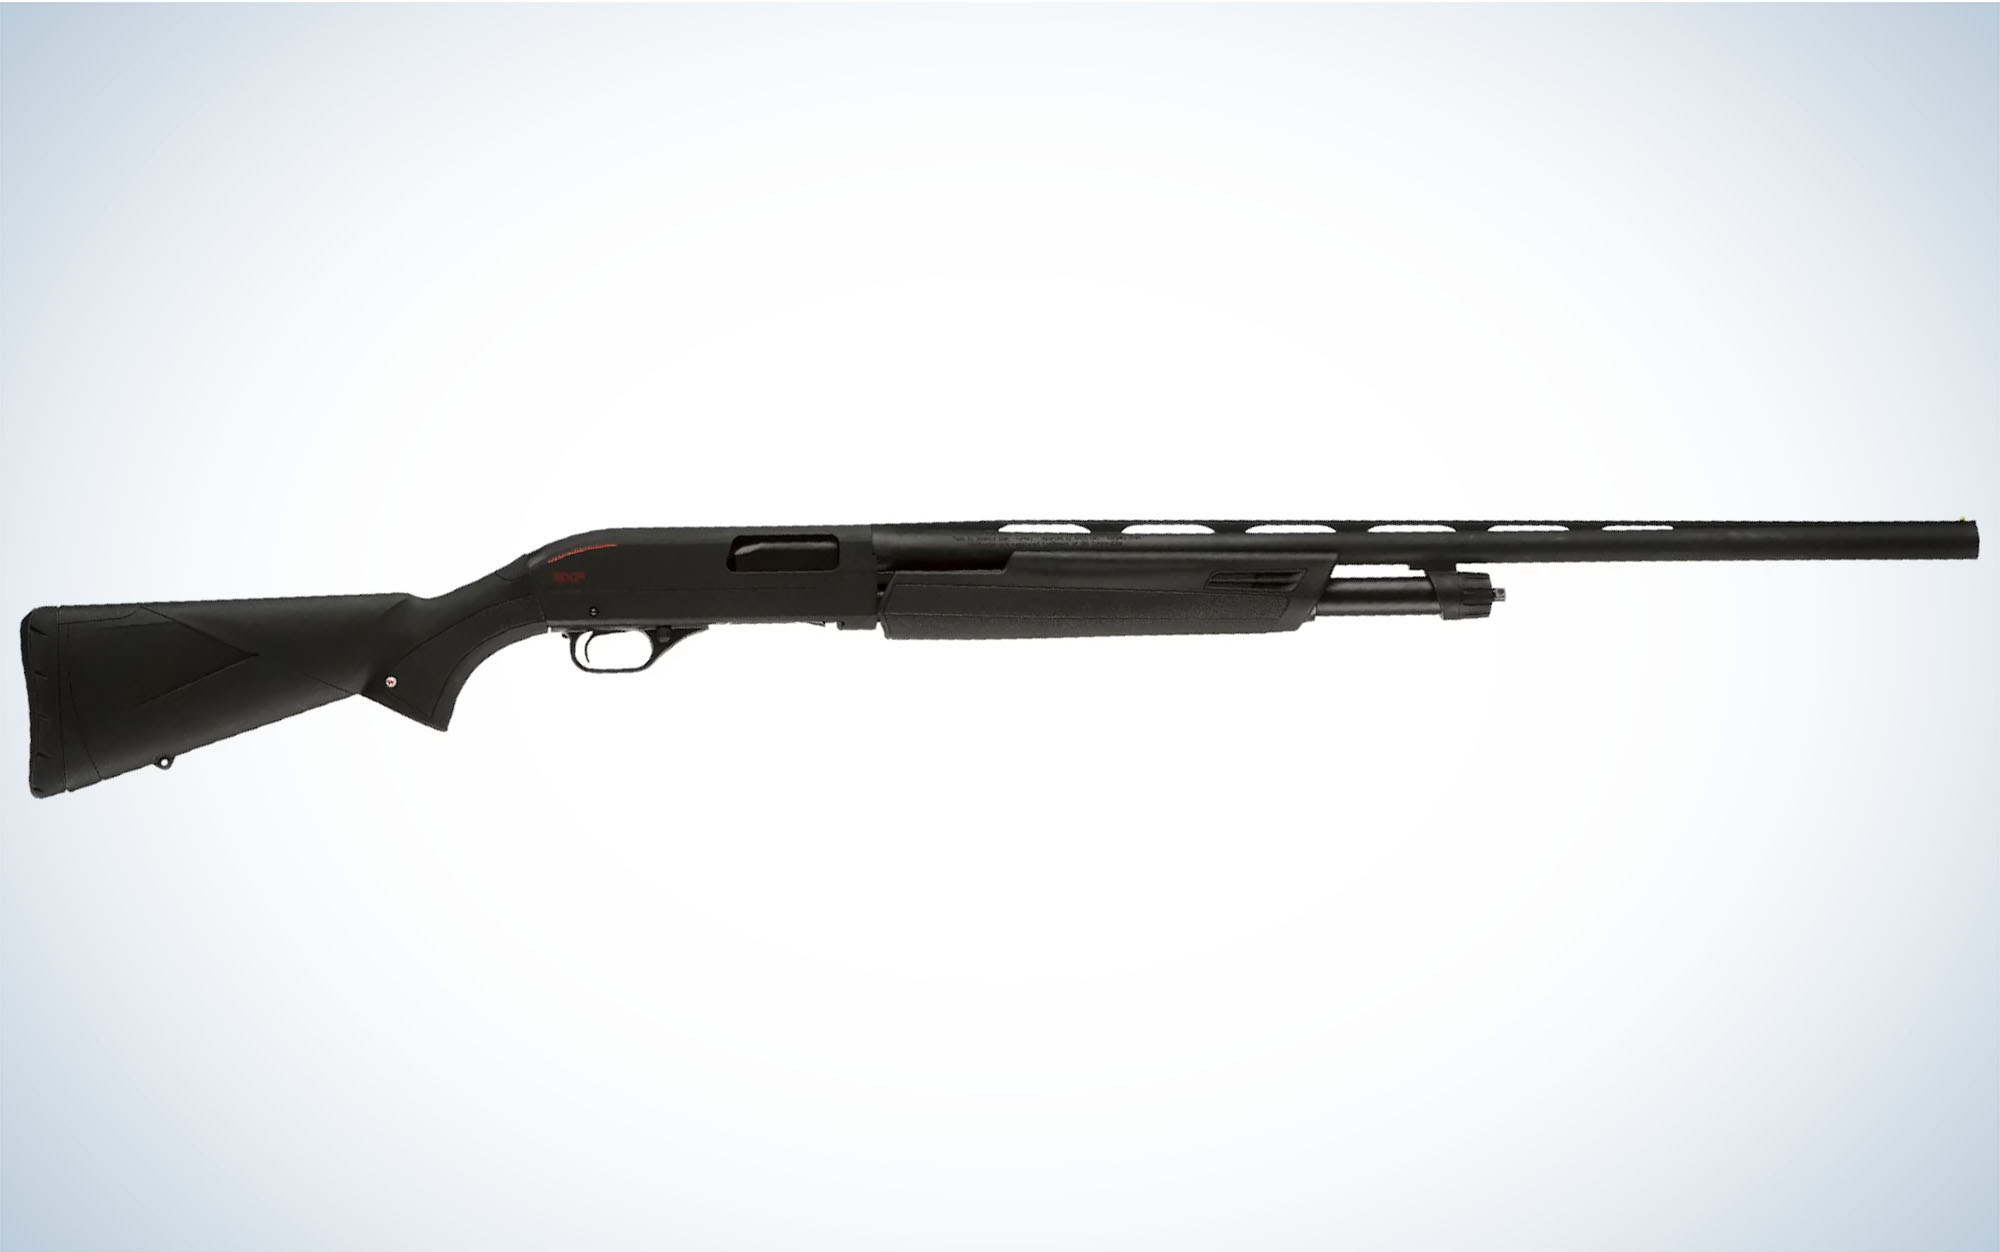 The Winchester SXP could replace the Remington 870.